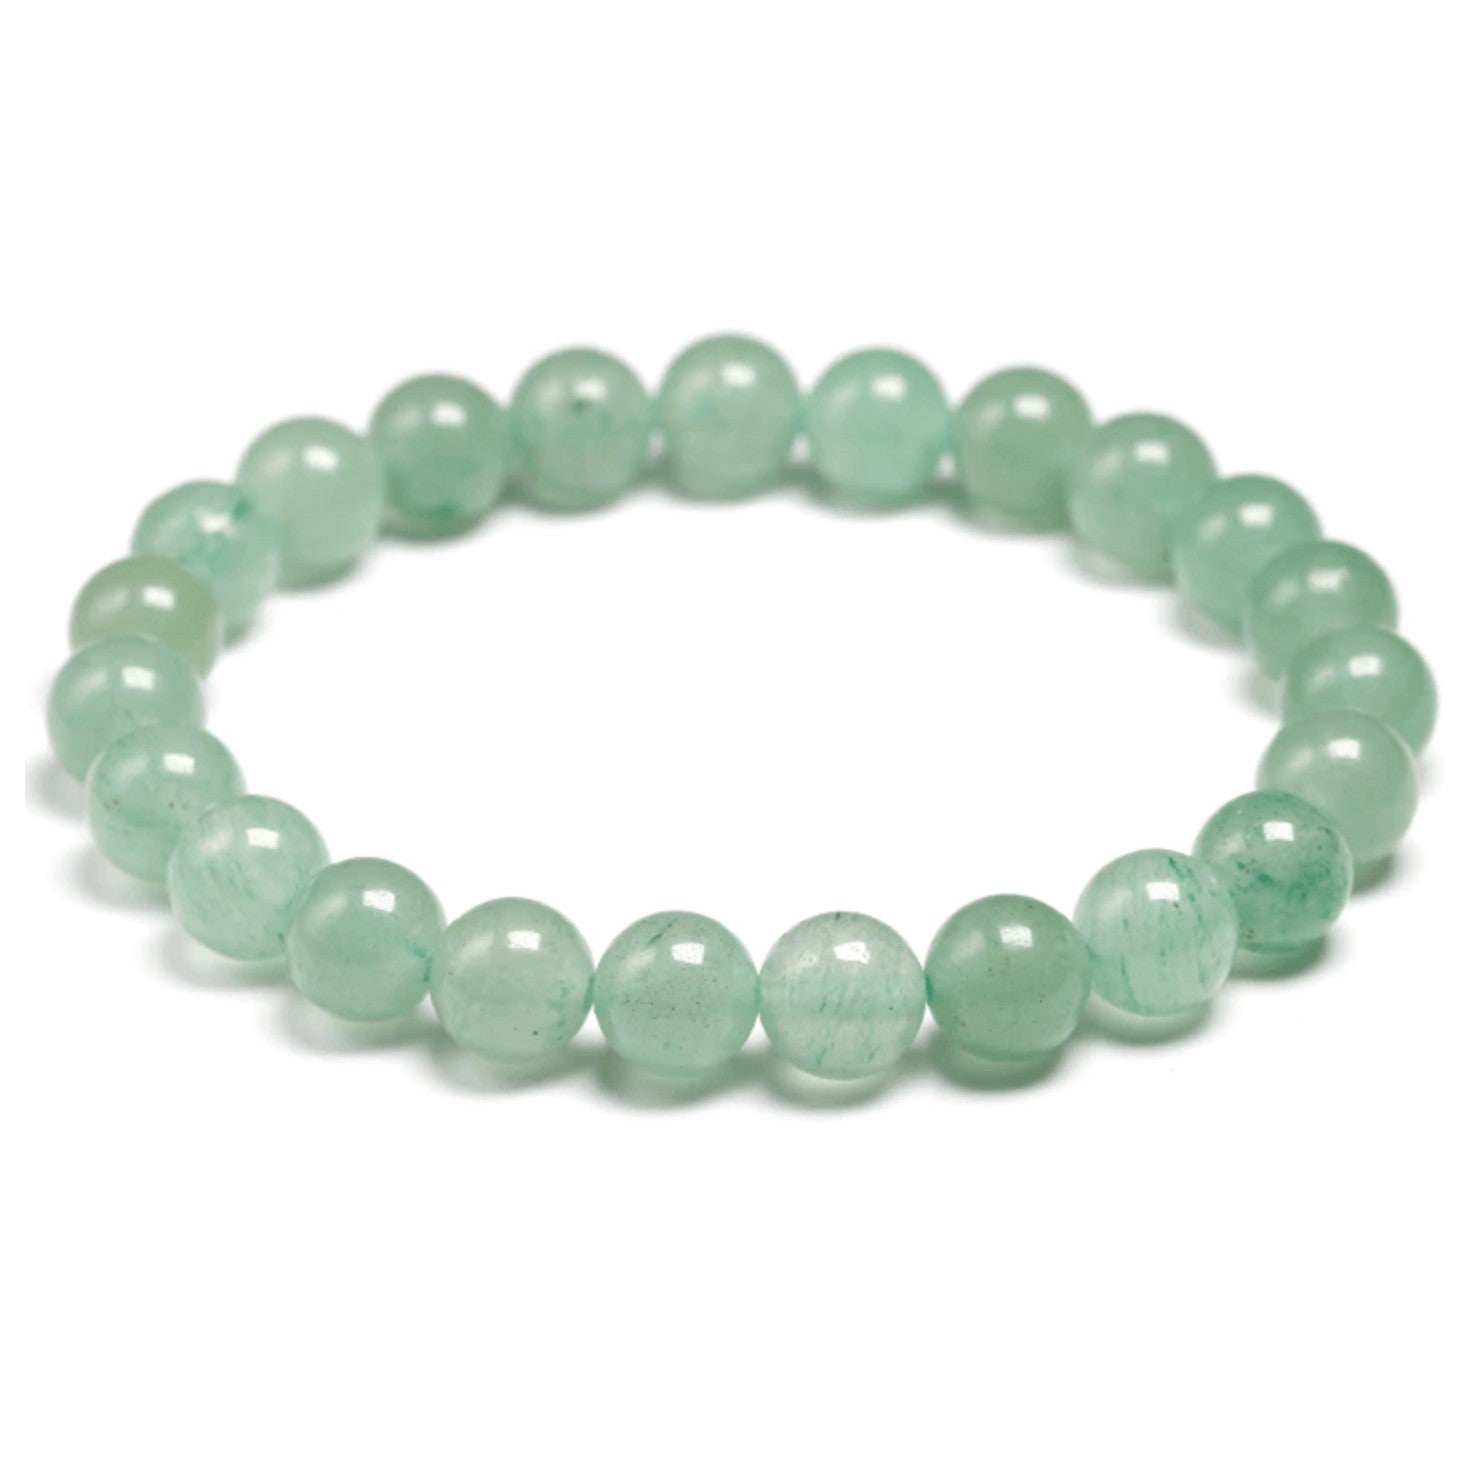 GREEN AVENTURINE BRACELET.  Looking for a Unique Green Aventurine Bracelet, Aventurine Stone Natural Bead Bracelet? Find green aventurine bracelet benefits when you shop at Magic Crystals. Green aventurine stone bracelet.